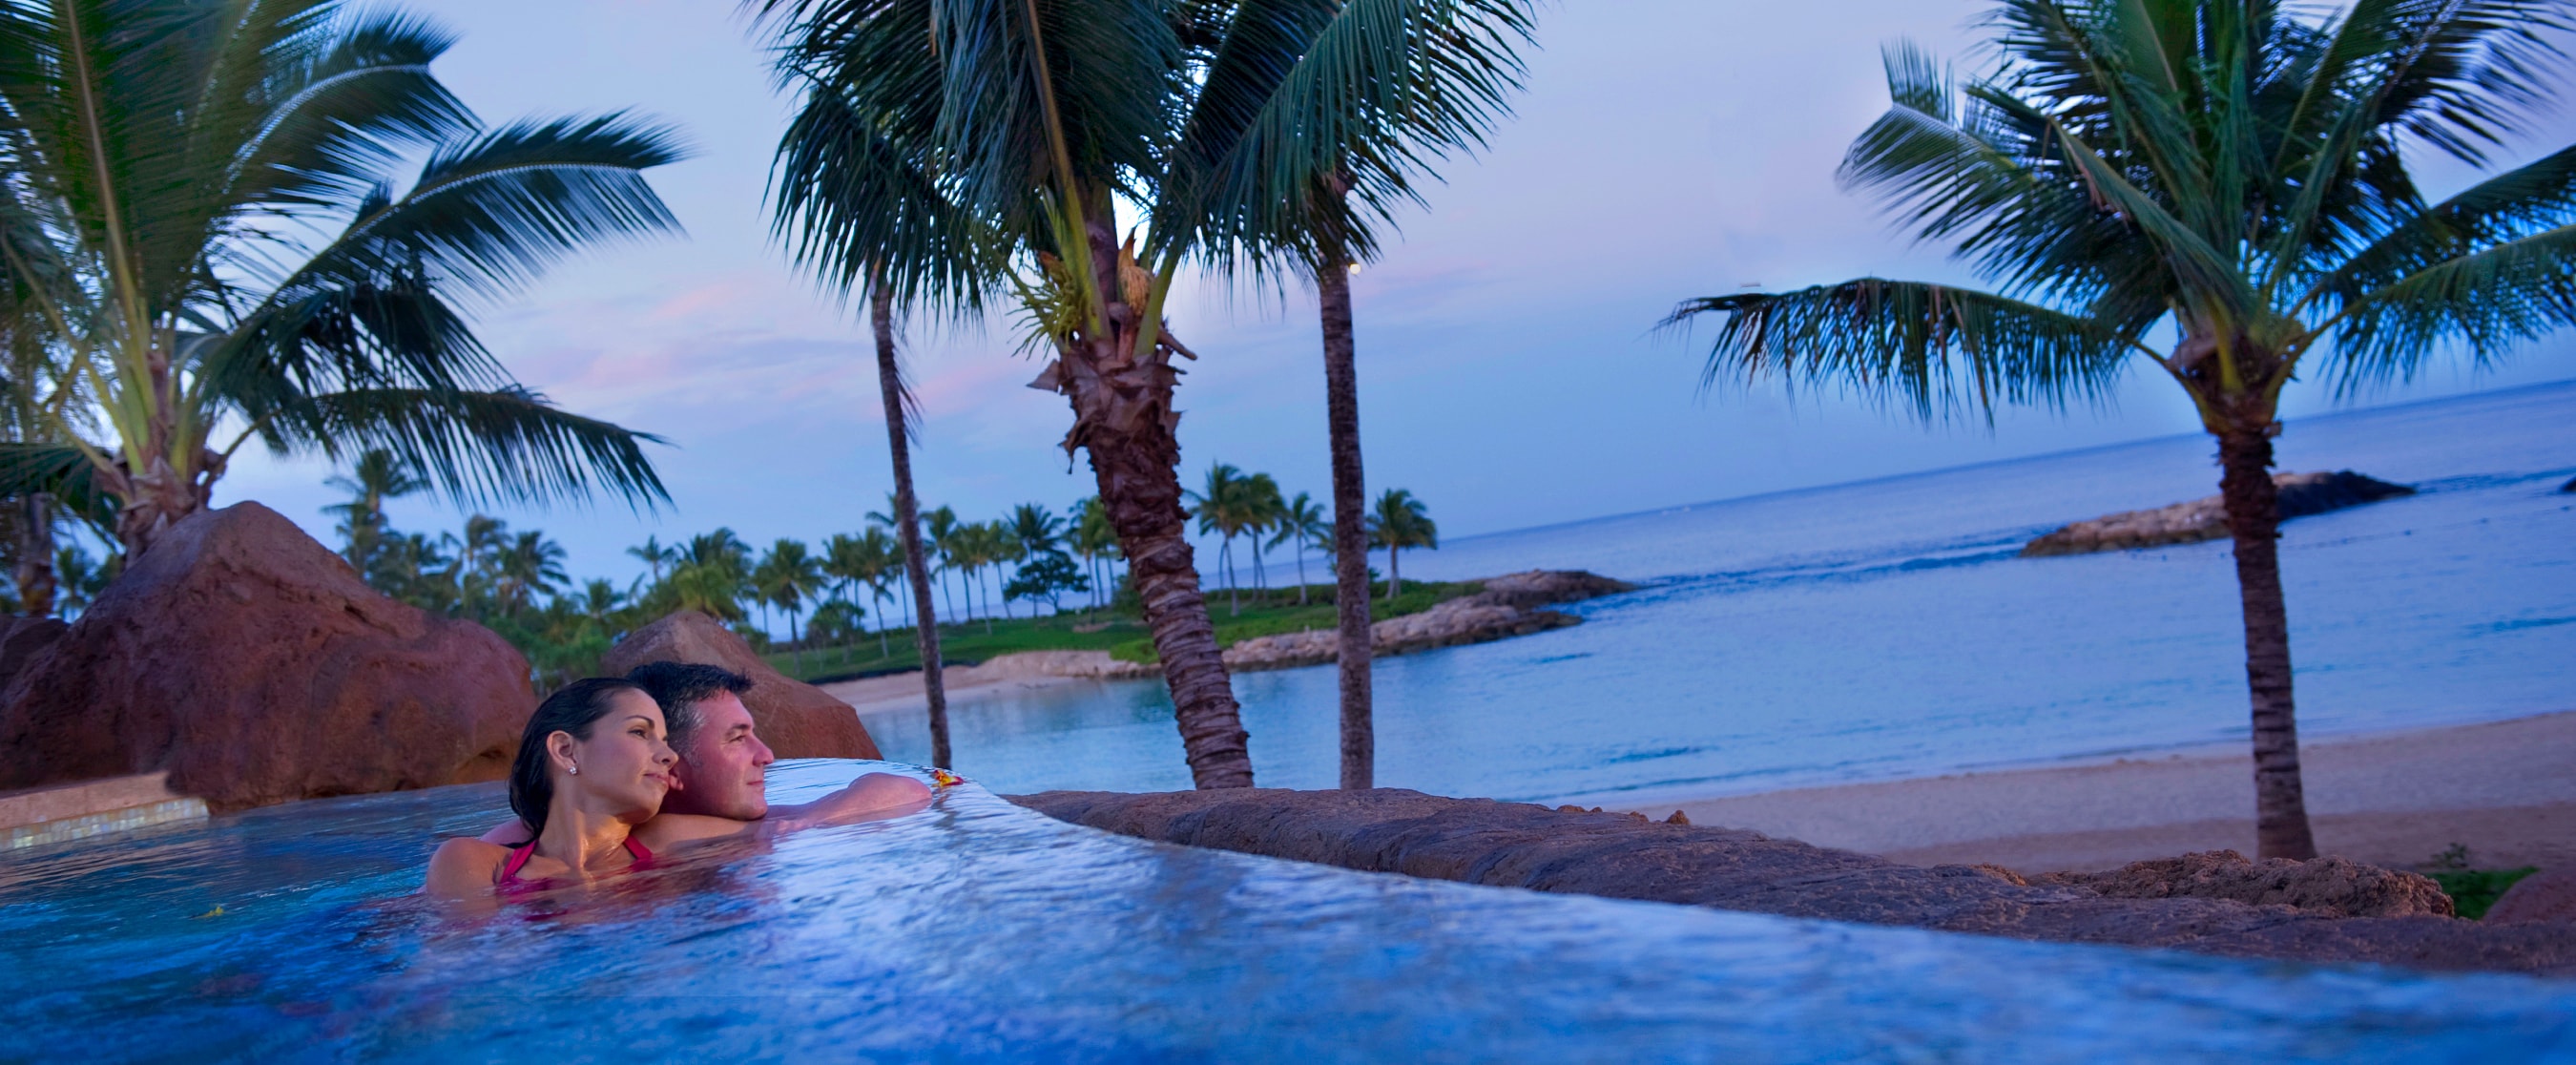 With the beachfront in the background, a couple lounges together in the adults only whirlpool spa at Alohi Point of Aulani Resort and Spa